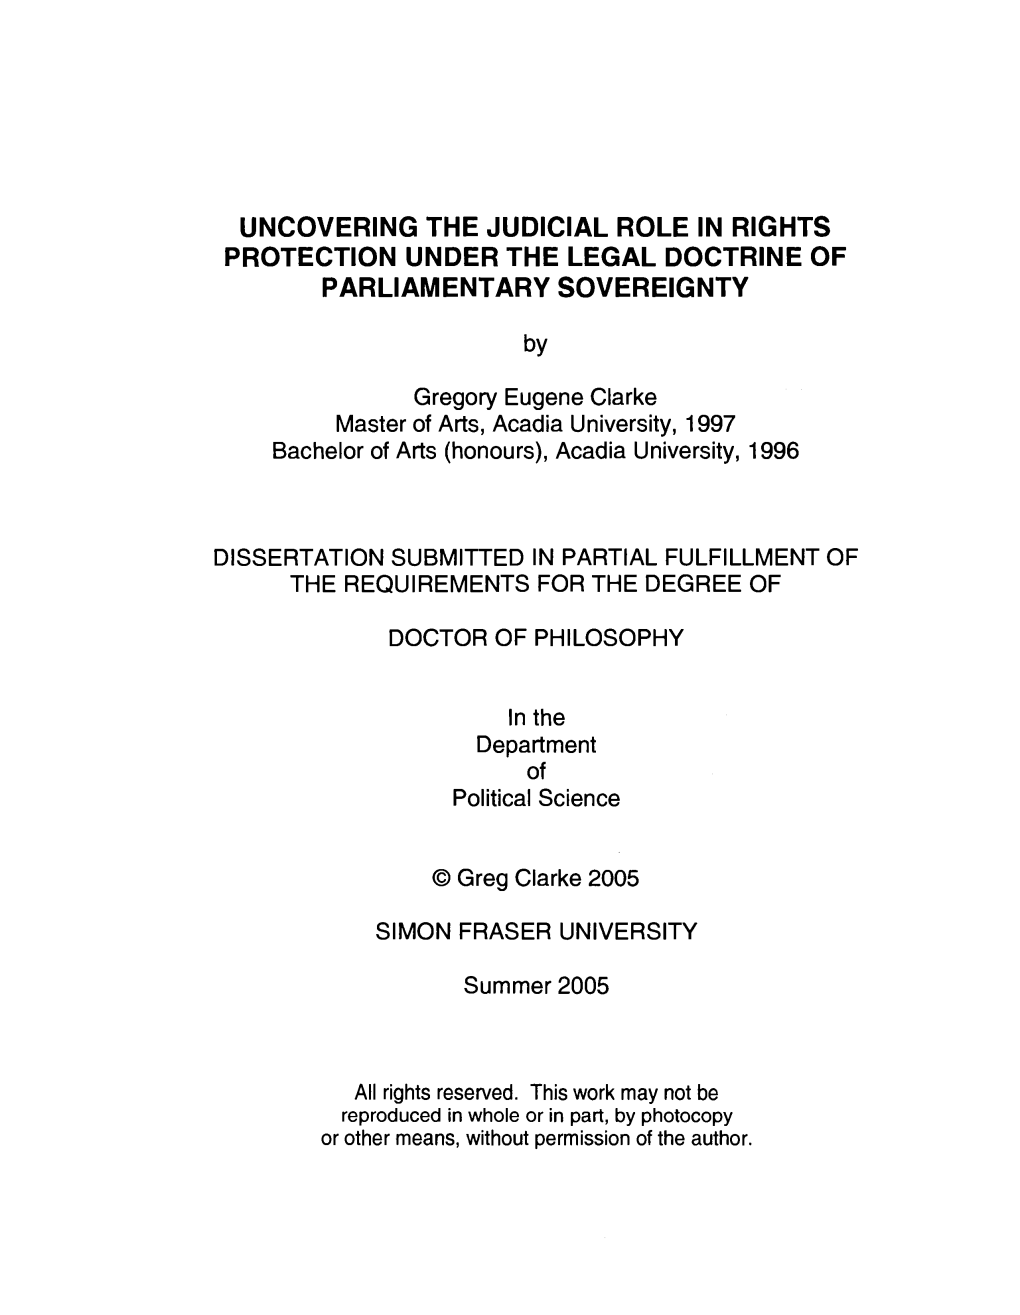 Uncovering the Judicial Role in Rights Protection Under the Legal Doctrine of Parliamentary Sovereignty